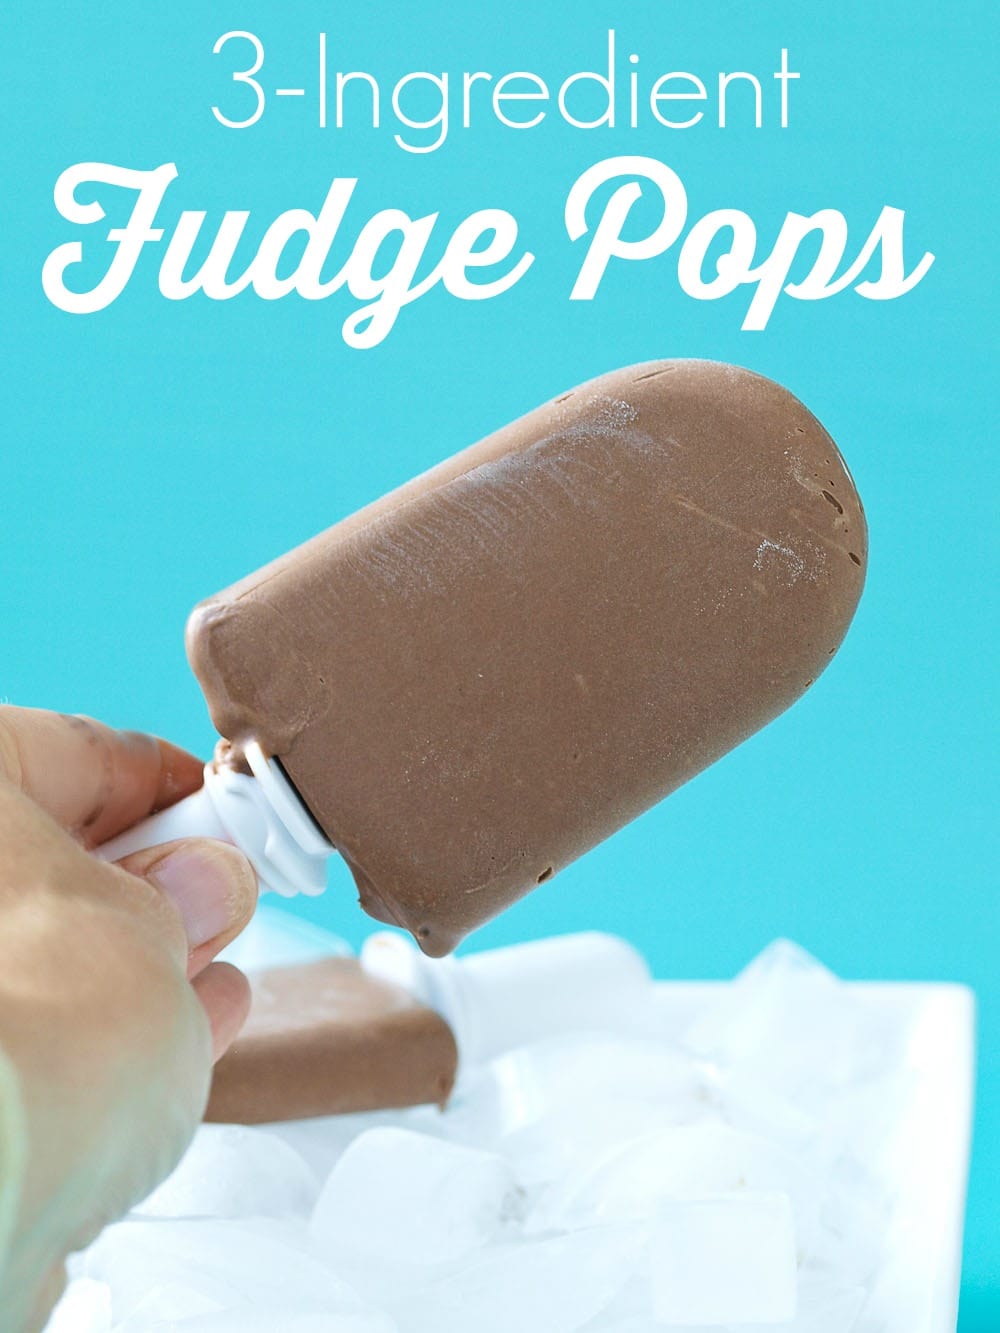 3-ingredient Fudge Pops recipe. This is a dairy-free, super easy fudge popsicle recipe. These are even BETTER than the fudge pops I remember eating in my childhood.